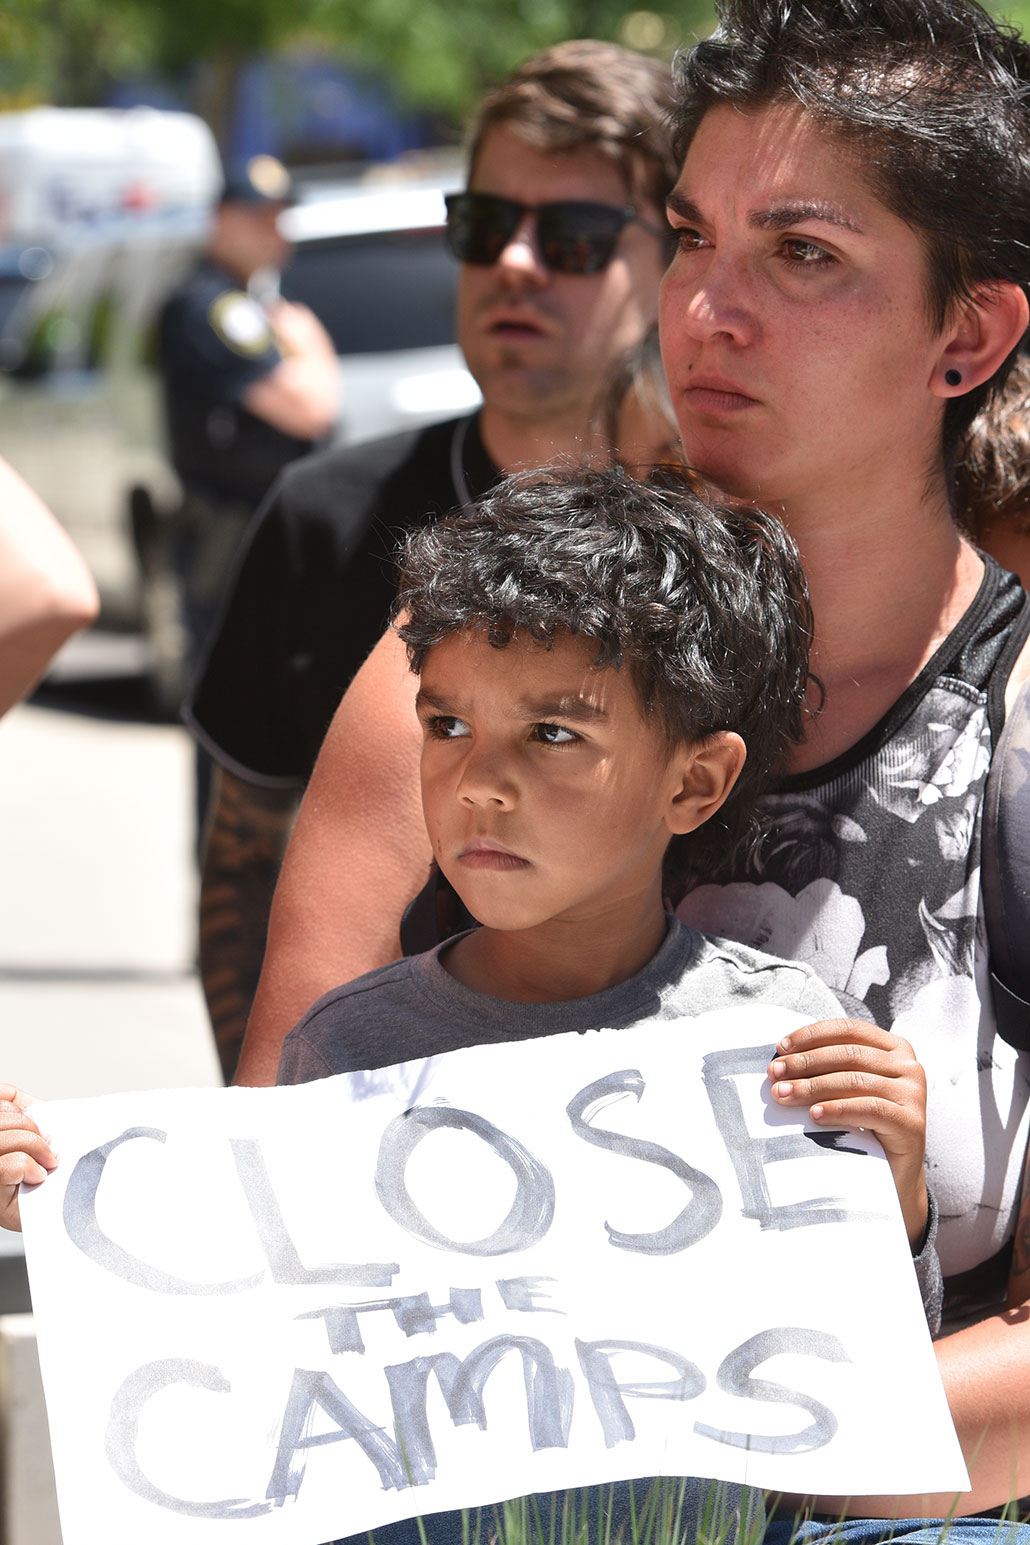 a boy and his mother at a protest. The boy is holding a sign that says "Close the Camps"